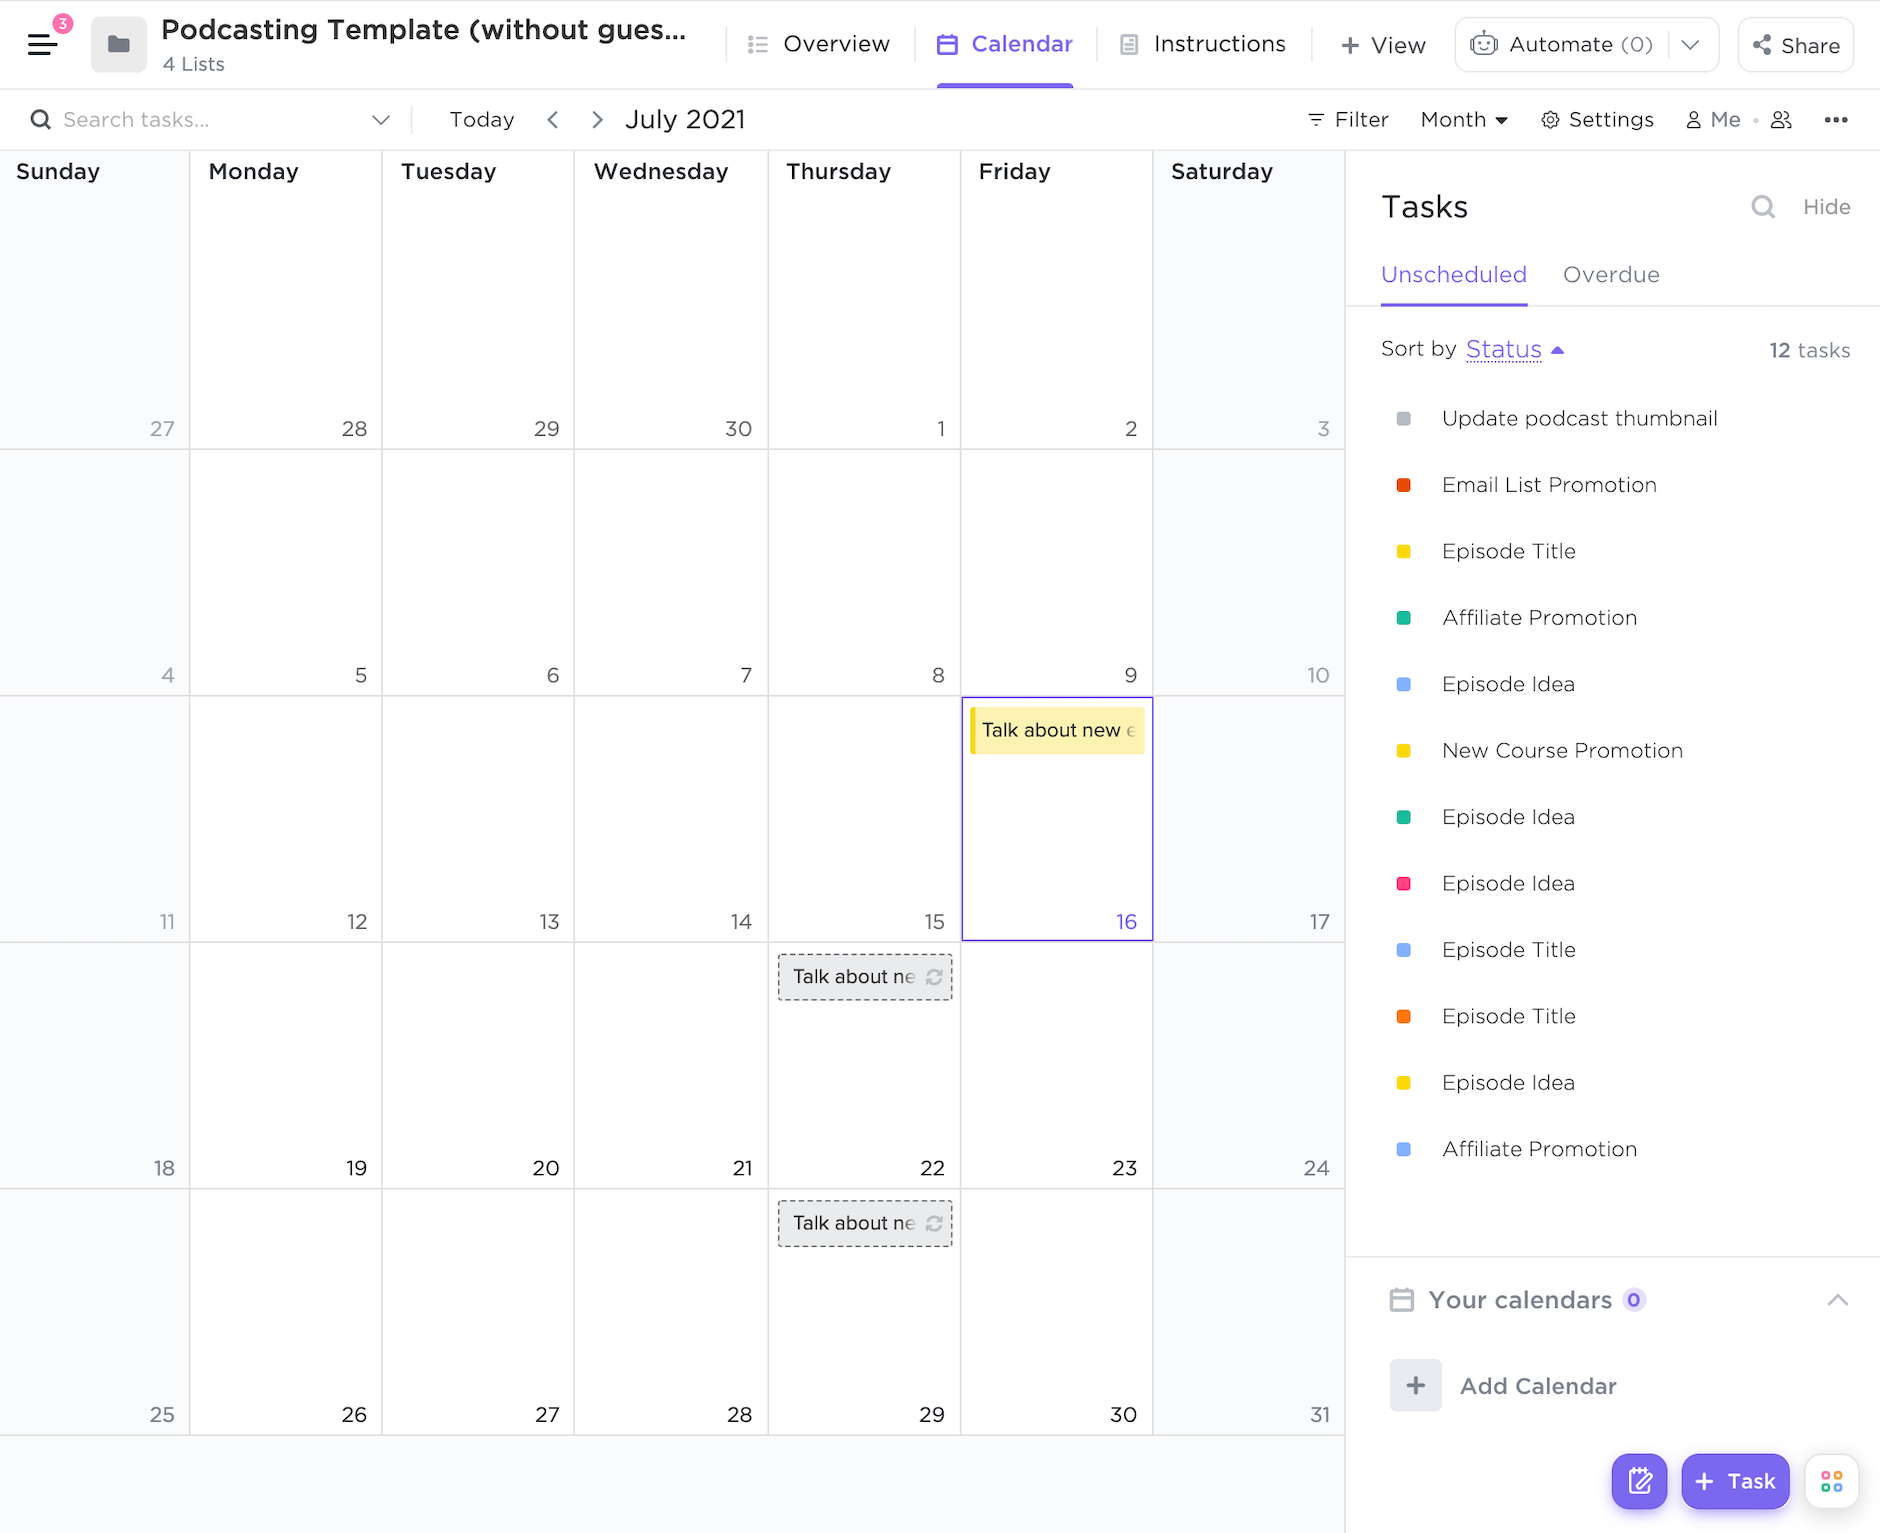 Podcasting (without guests) template Calendar view